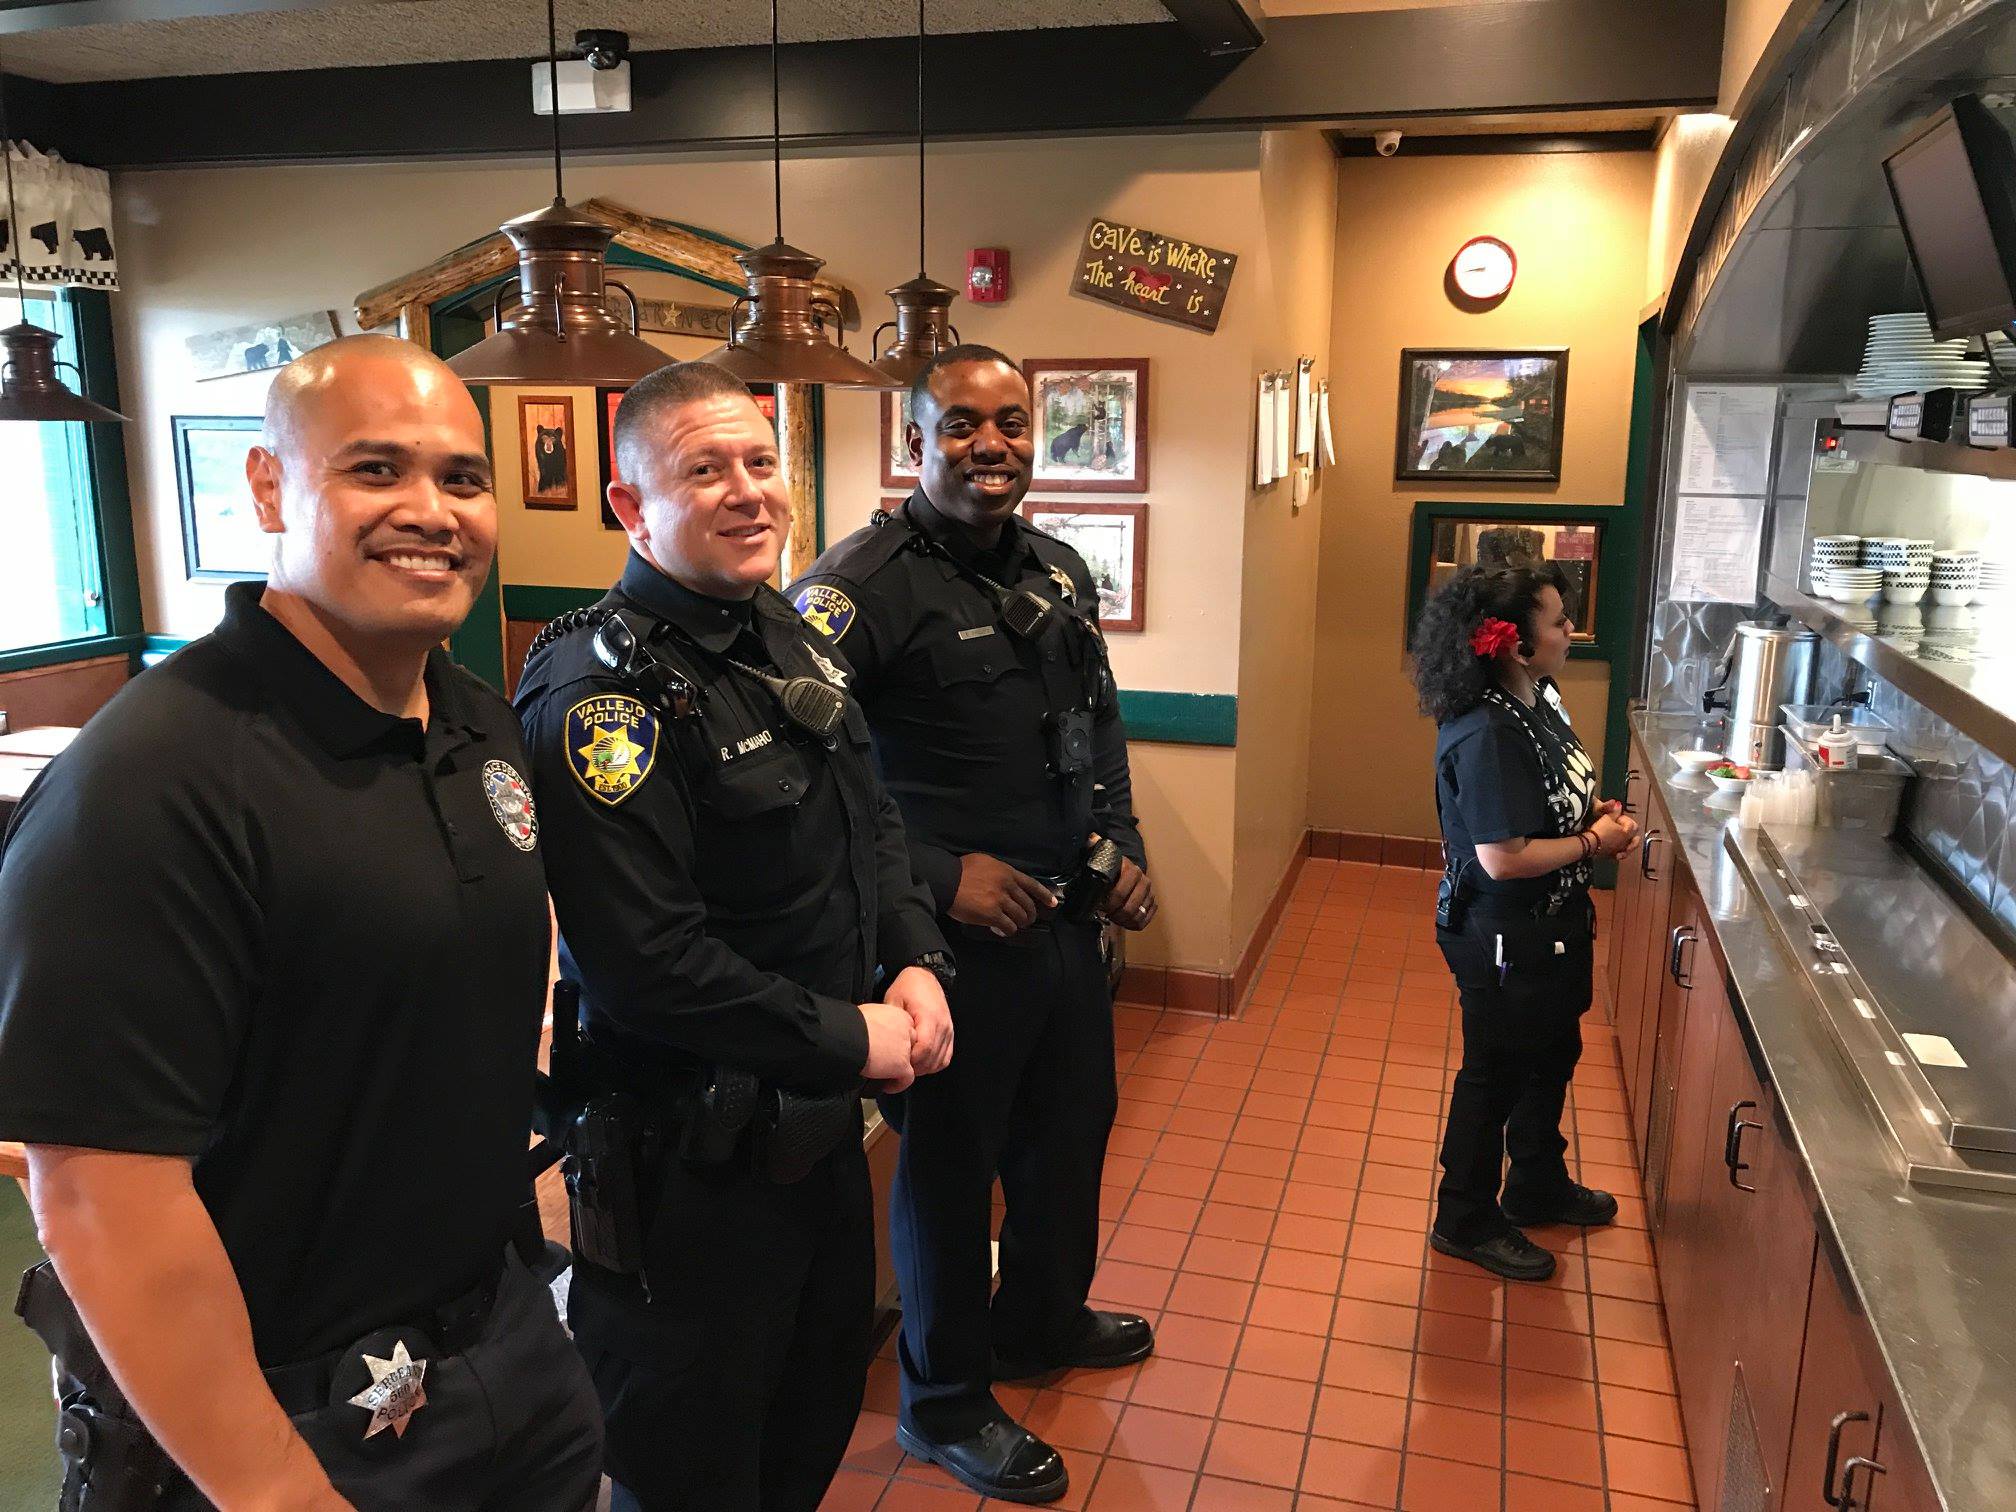 Three Vallejo police officers stand at a kitchen counter waiting to take orders to diners during a "tip-a-cop" charity event benefitting the Special Olympics of Northern California.